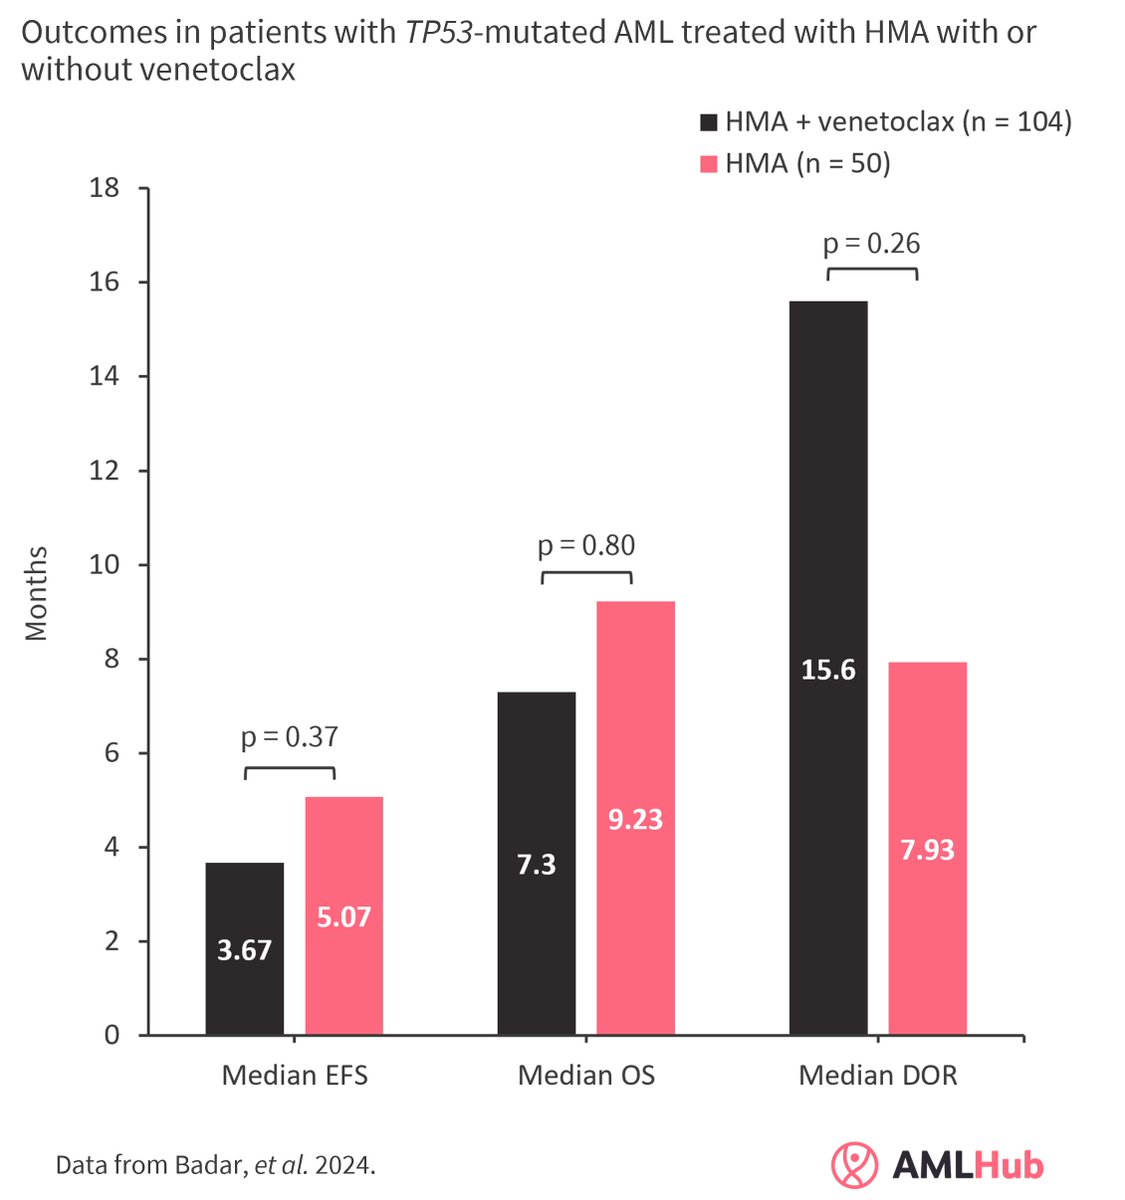 Read our summary of a study published by @TalhaBadarMD comparing HMA + venetoclax with HMAs alone in adults with newly diagnosed TP53-mutated AML 👉 loom.ly/ZwBv1aM #AMLsm #leusm #MedicalEducation